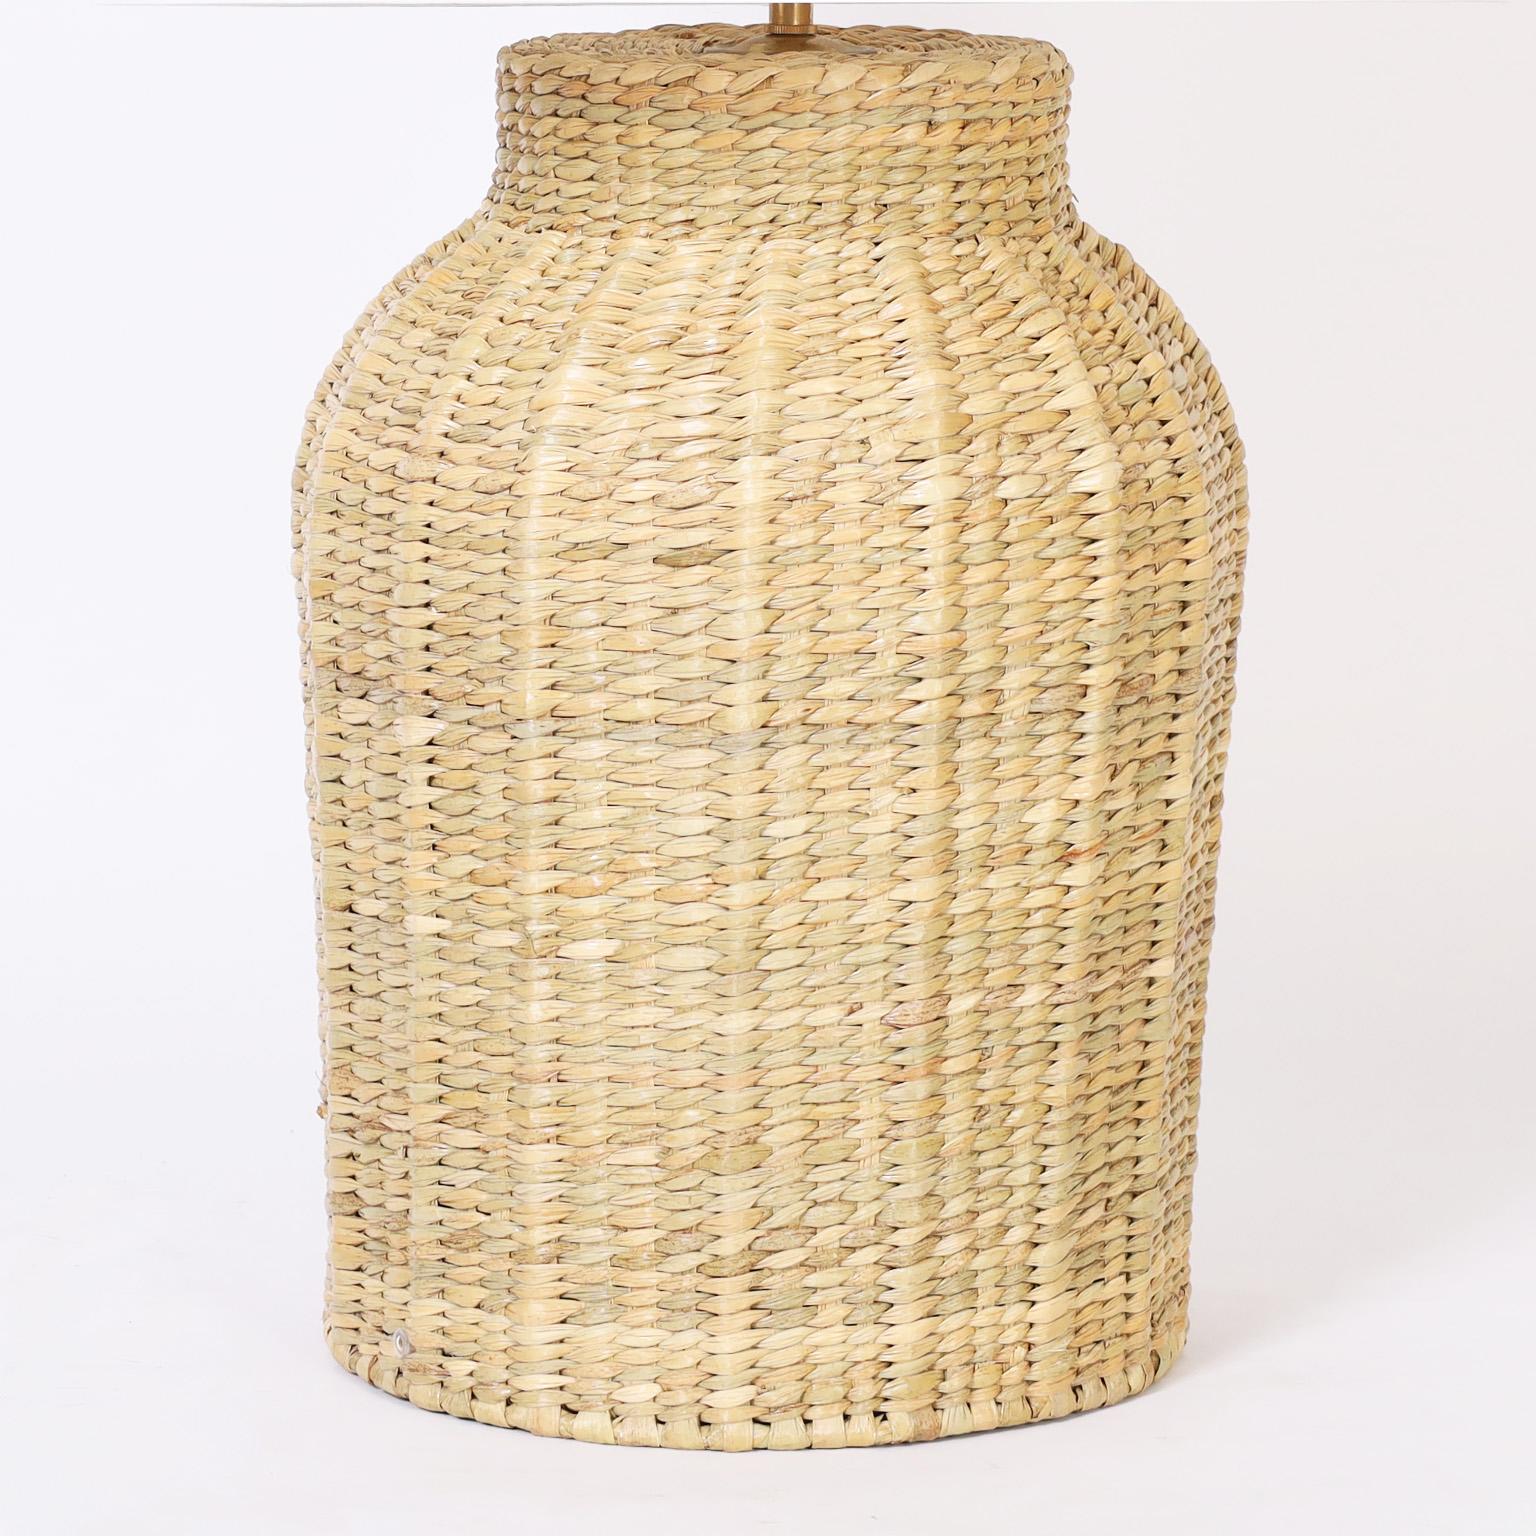 Organic Modern Pair of Wicker Bottle Form Table Lamps from the FS Flores Collection For Sale